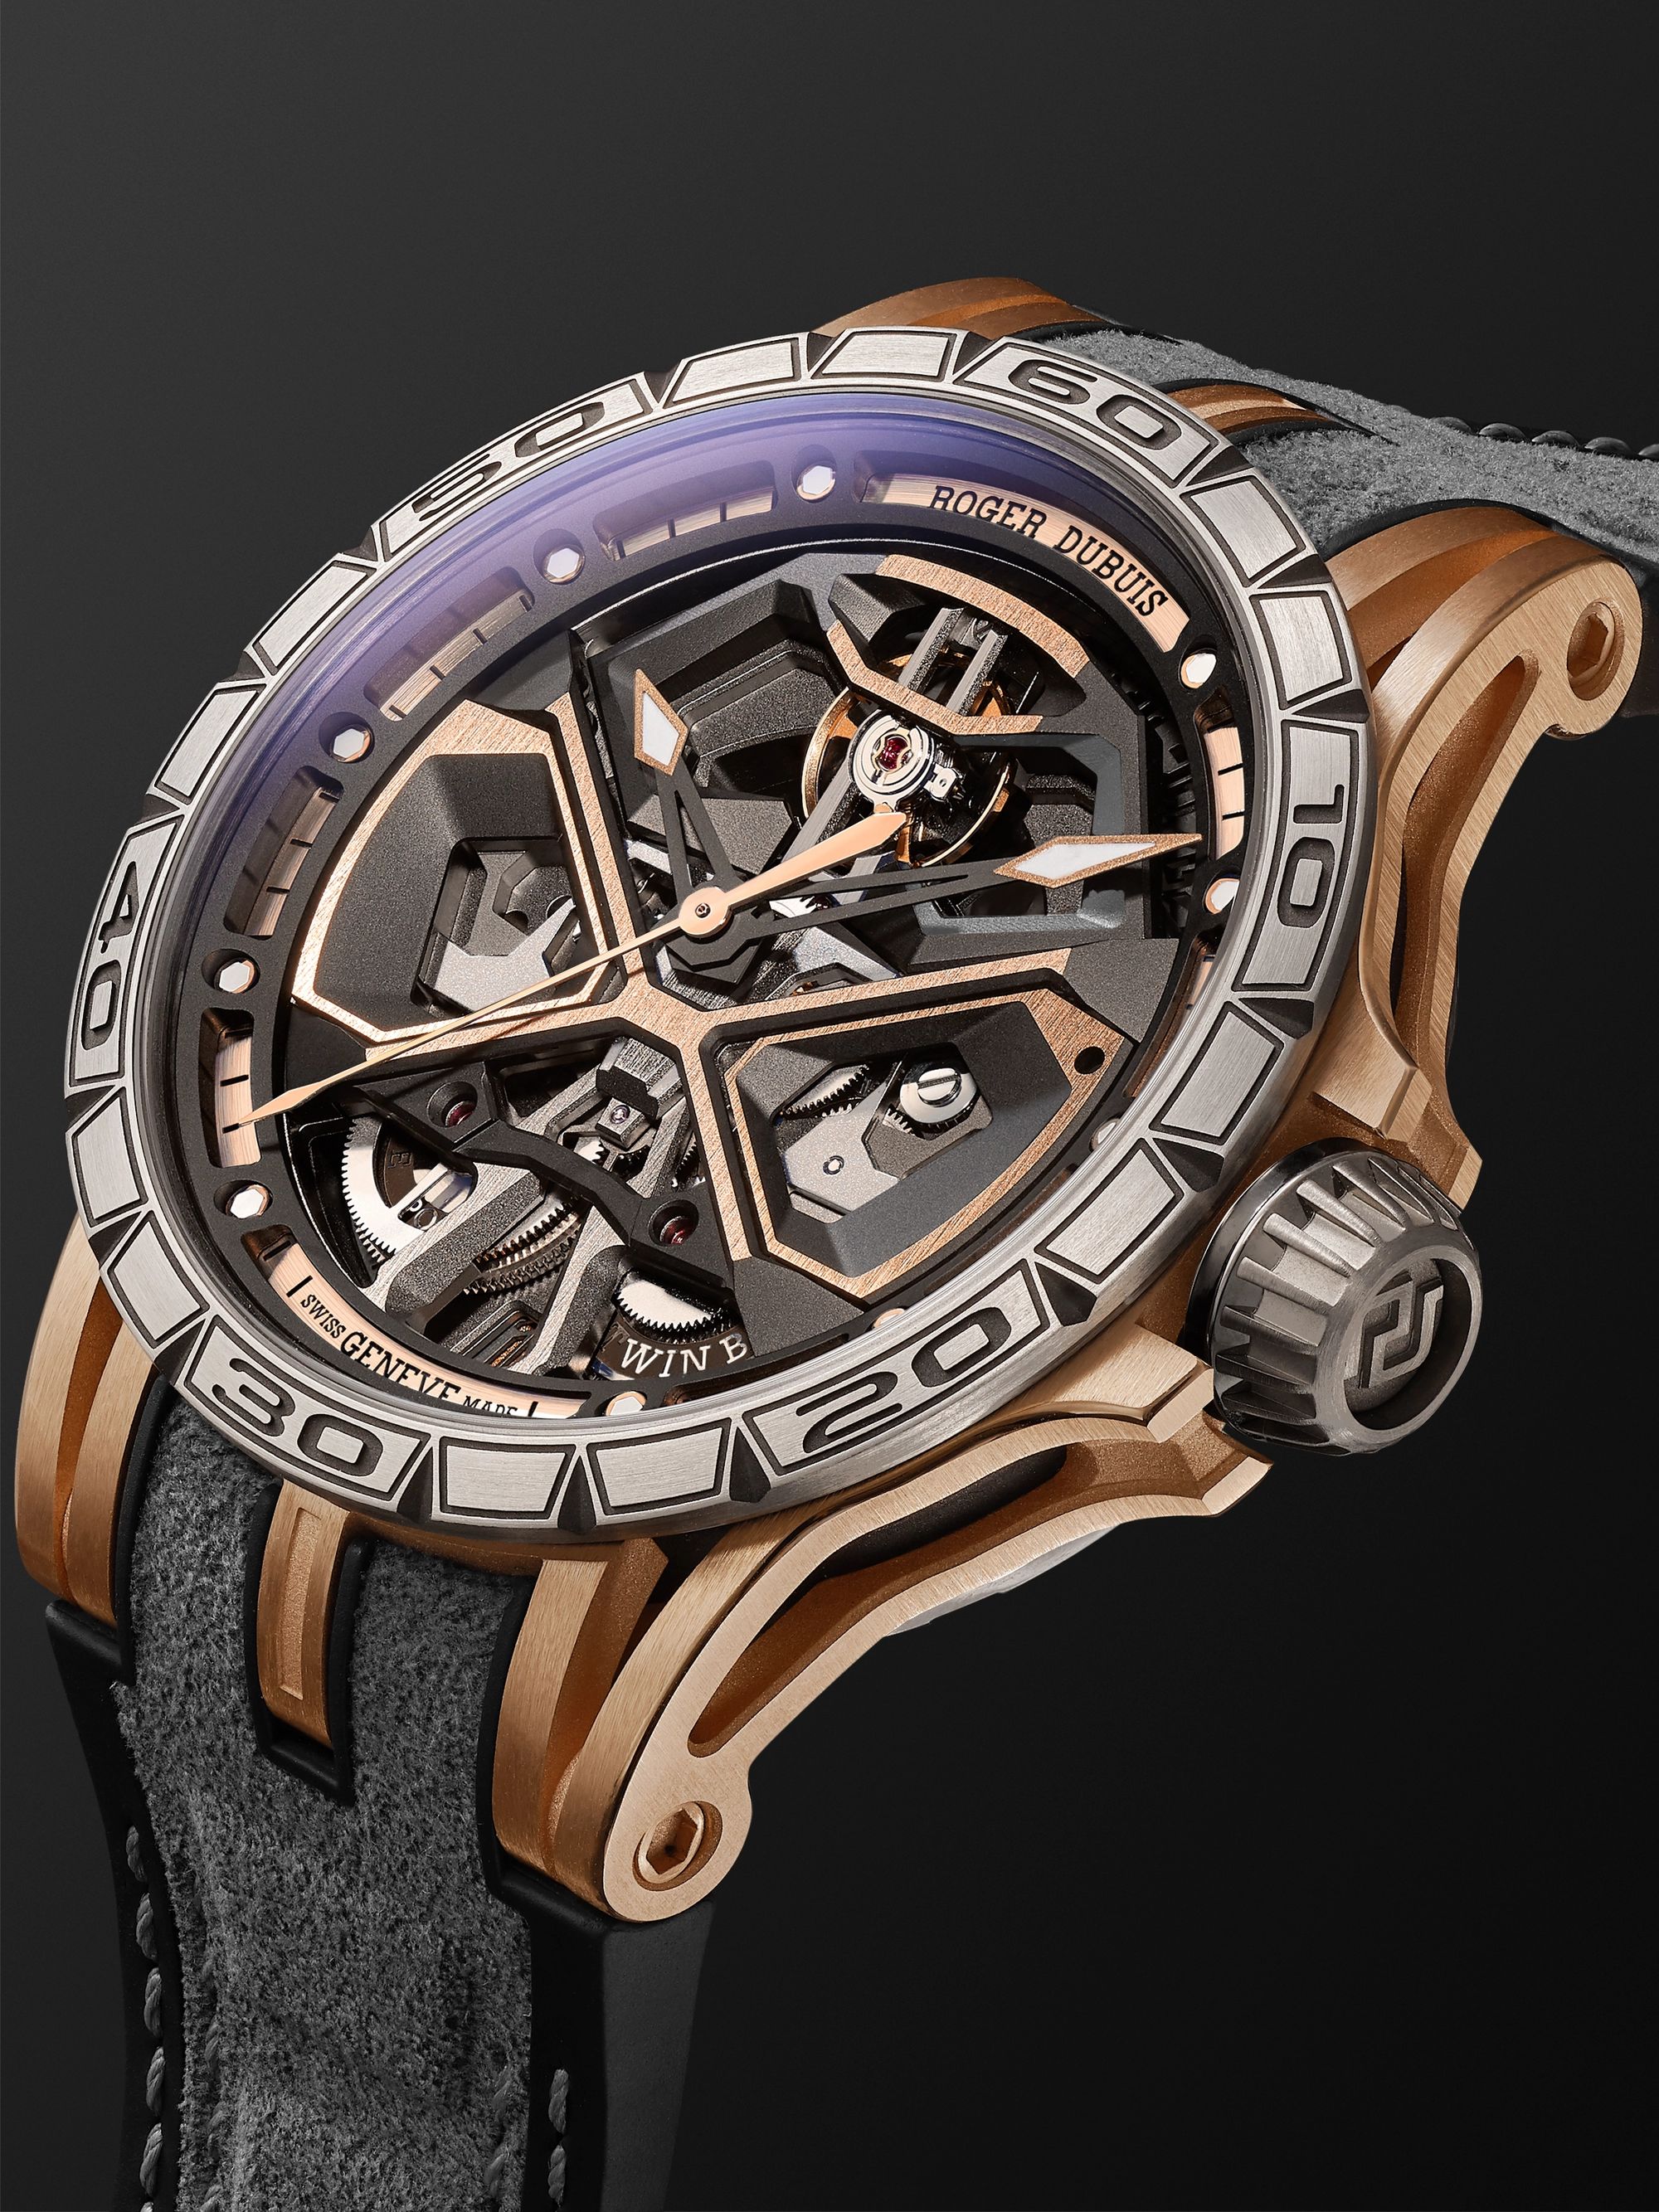 ROGER DUBUIS Excalibur Spider Huracán Automatic 45mm 18-Karat Pink Gold, Titanium and Rubber Watch, Ref. No. RDDBEX0750